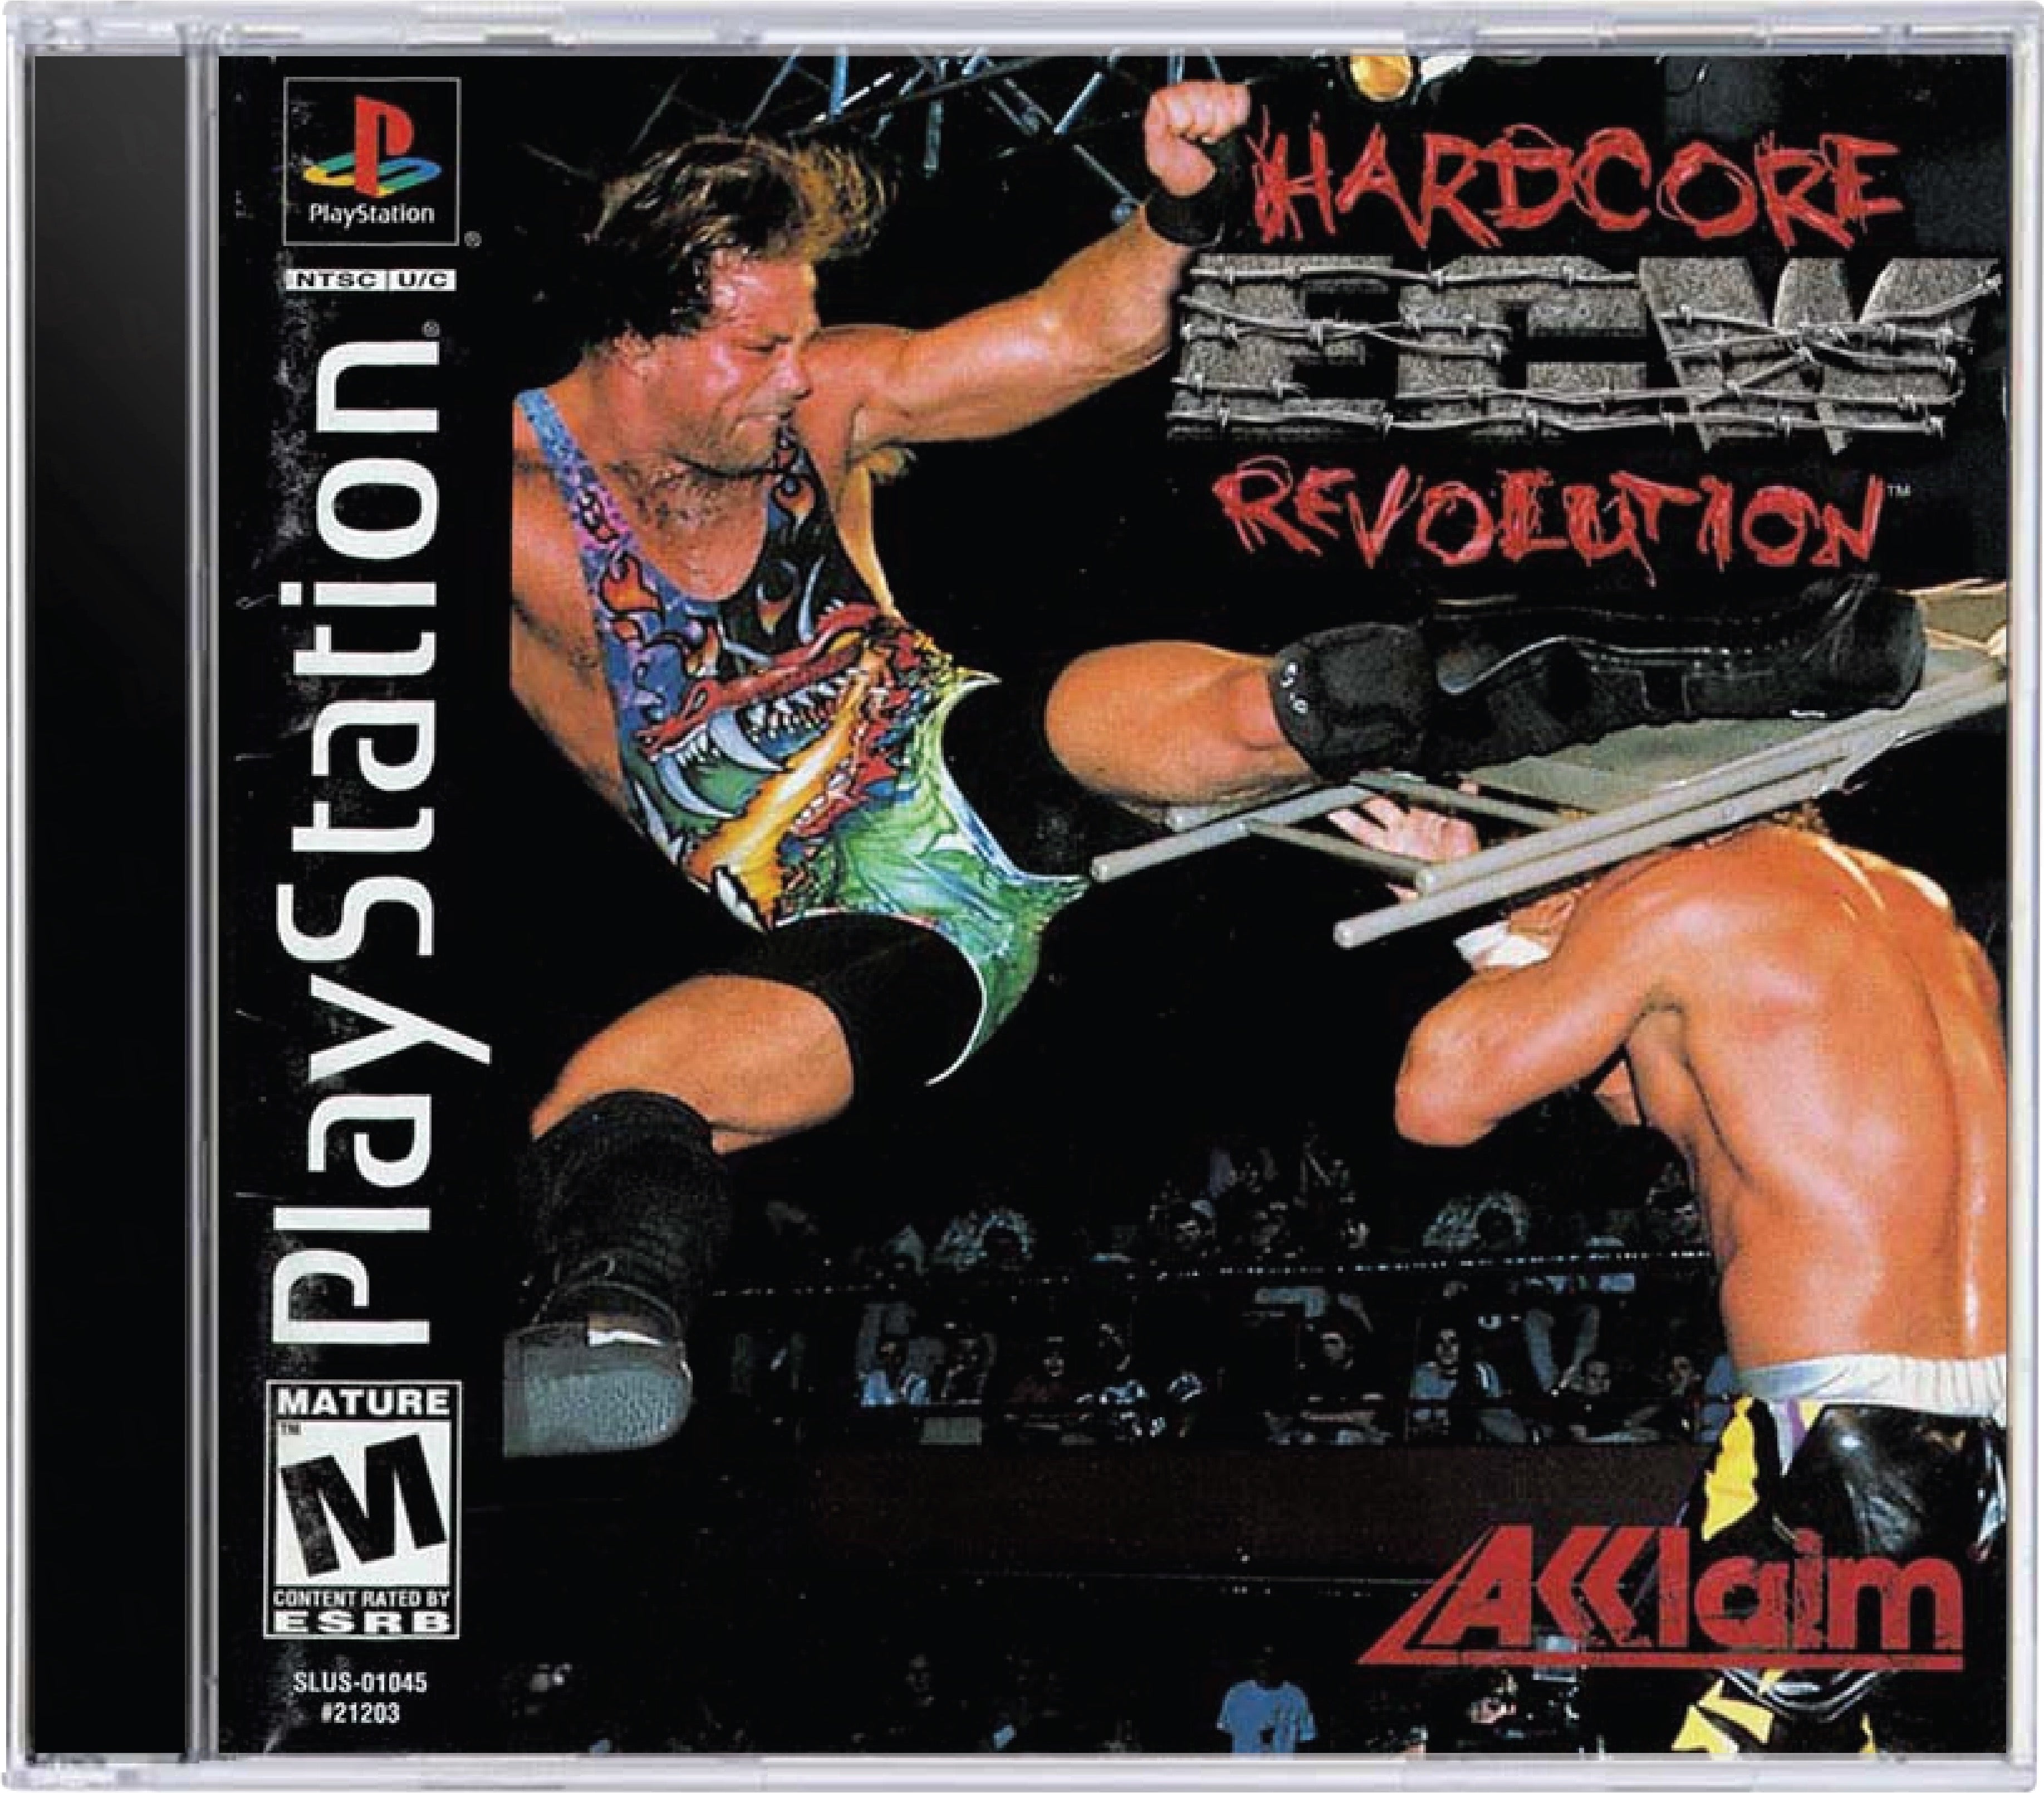 ECW Hardcore Revolution Cover Art and Product Photo